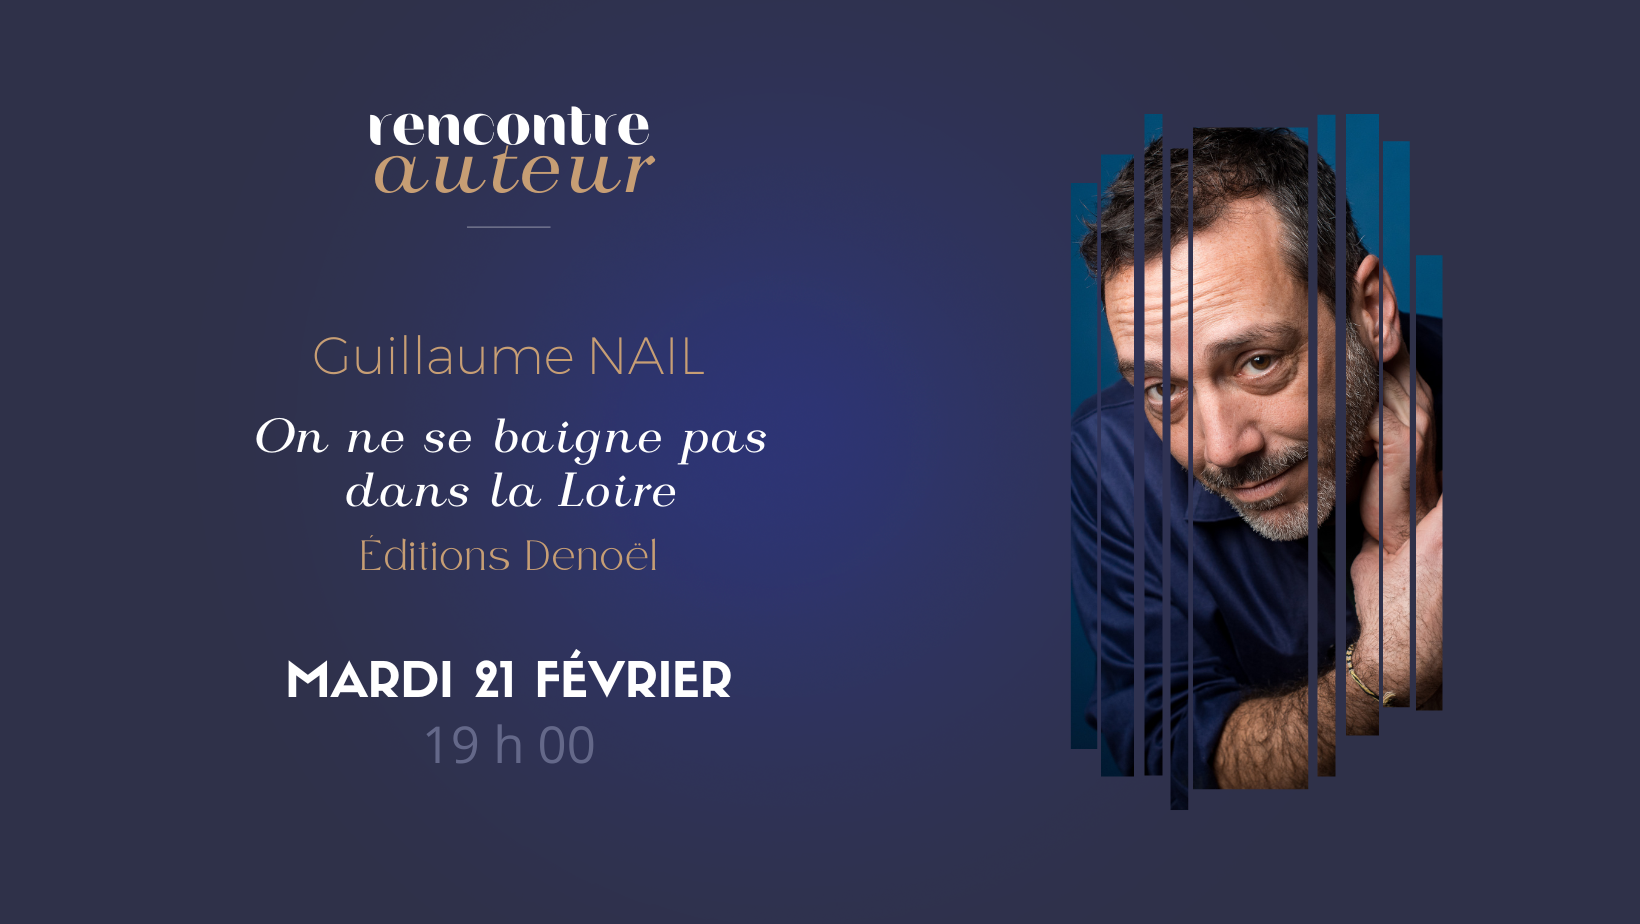 Guillaume Nail